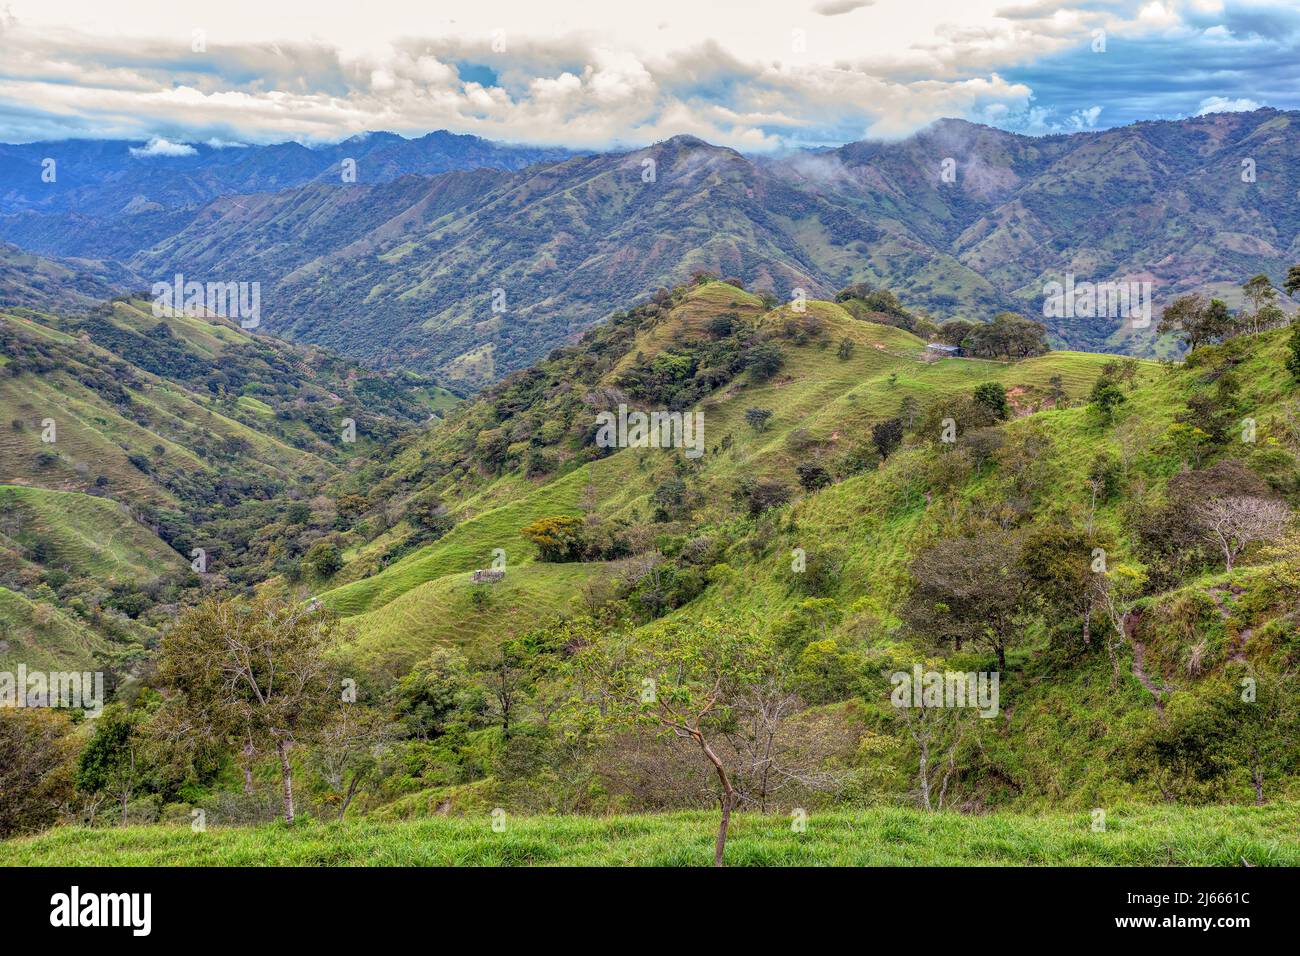 Beautiful view on the hills and forest surrounding Los Quetzales national park, beautiful Costa Rica Wilderness landscape Stock Photo